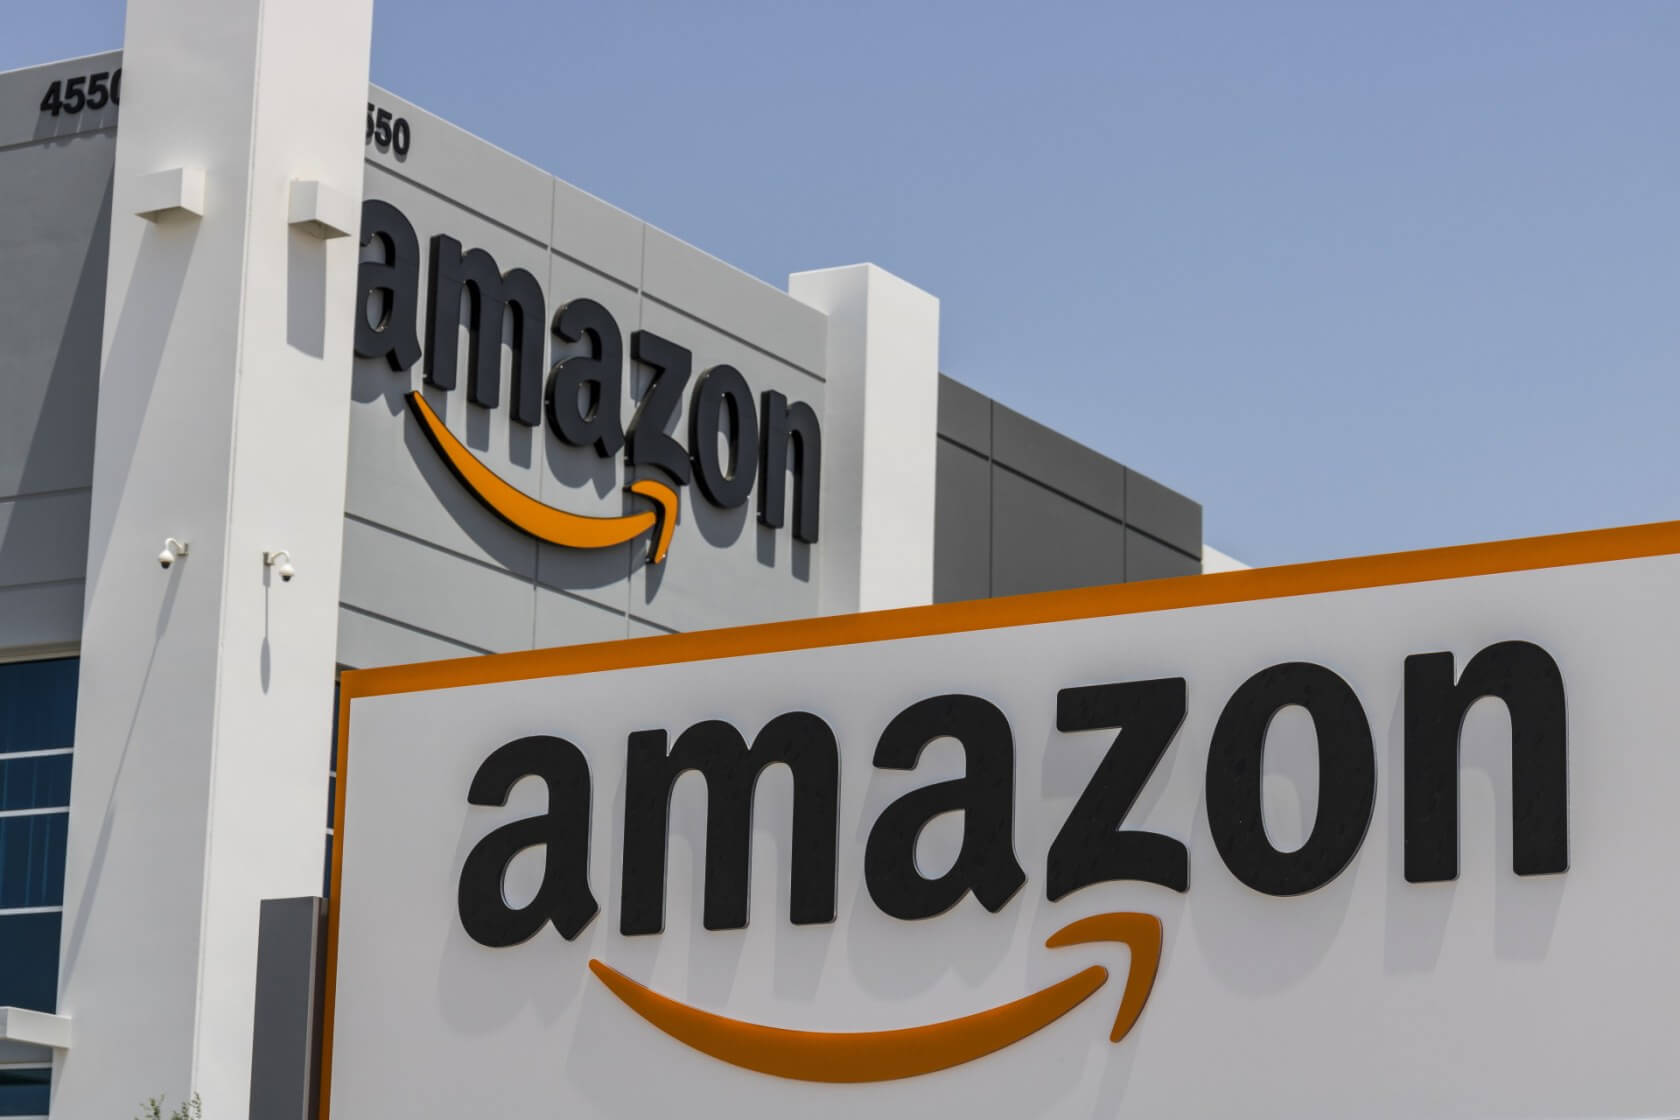 Report claims Amazon will reveal its own cloud gaming platform in 2020 - dealsinretail